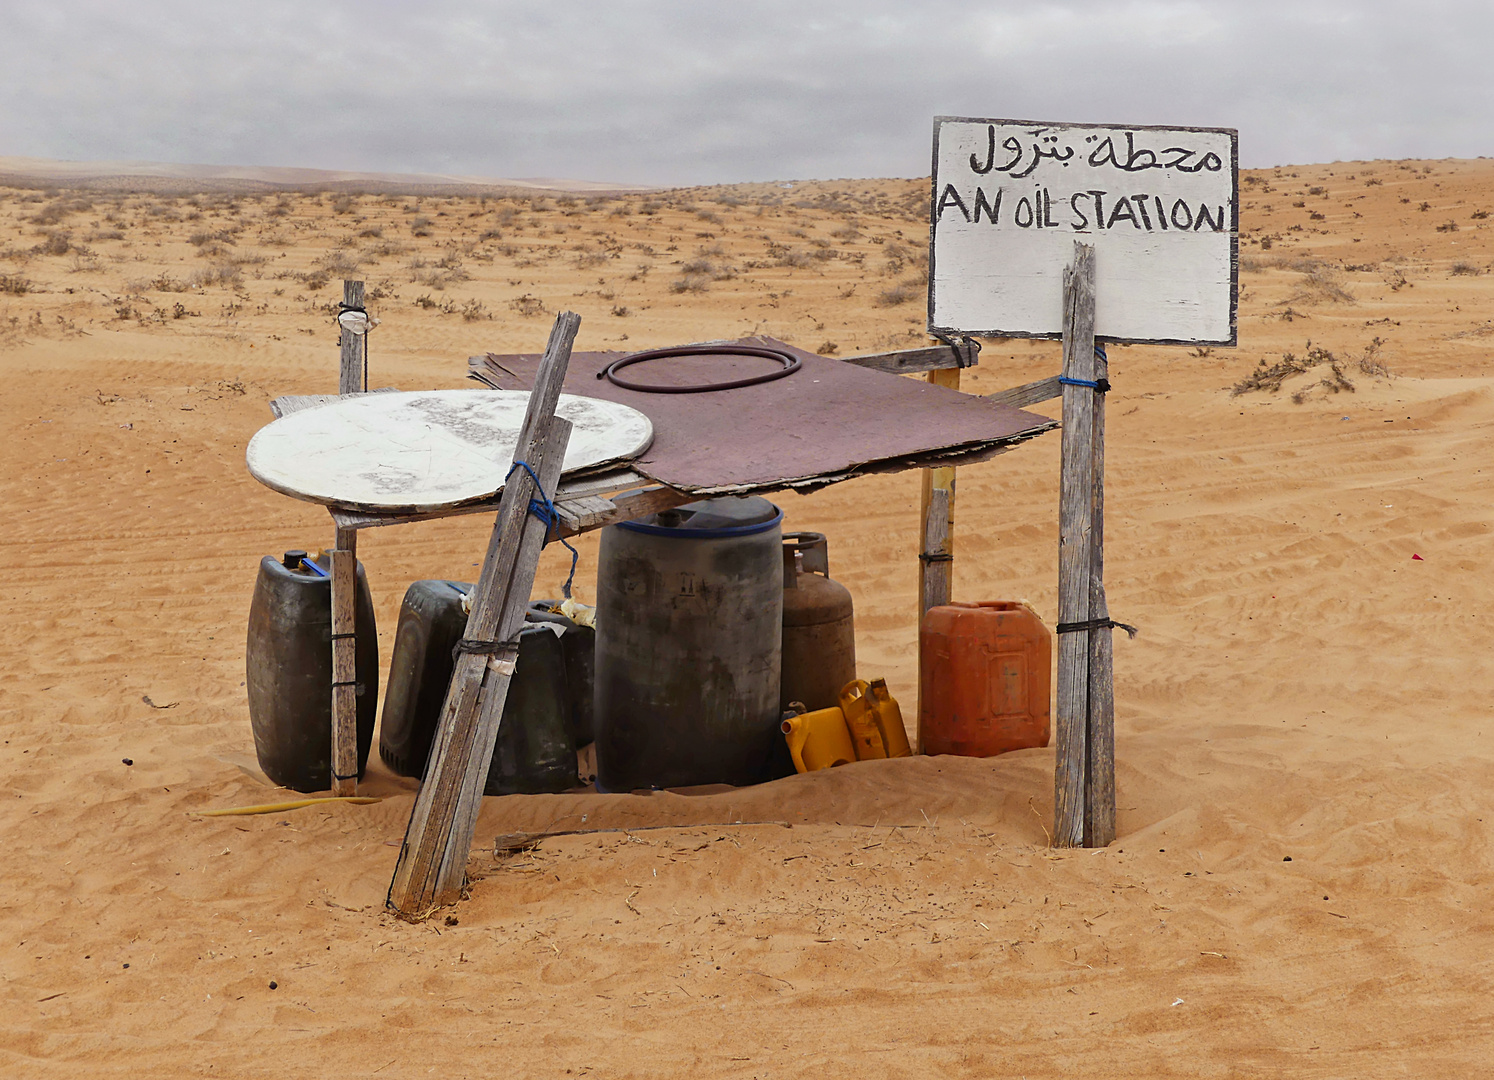 An Oil Station